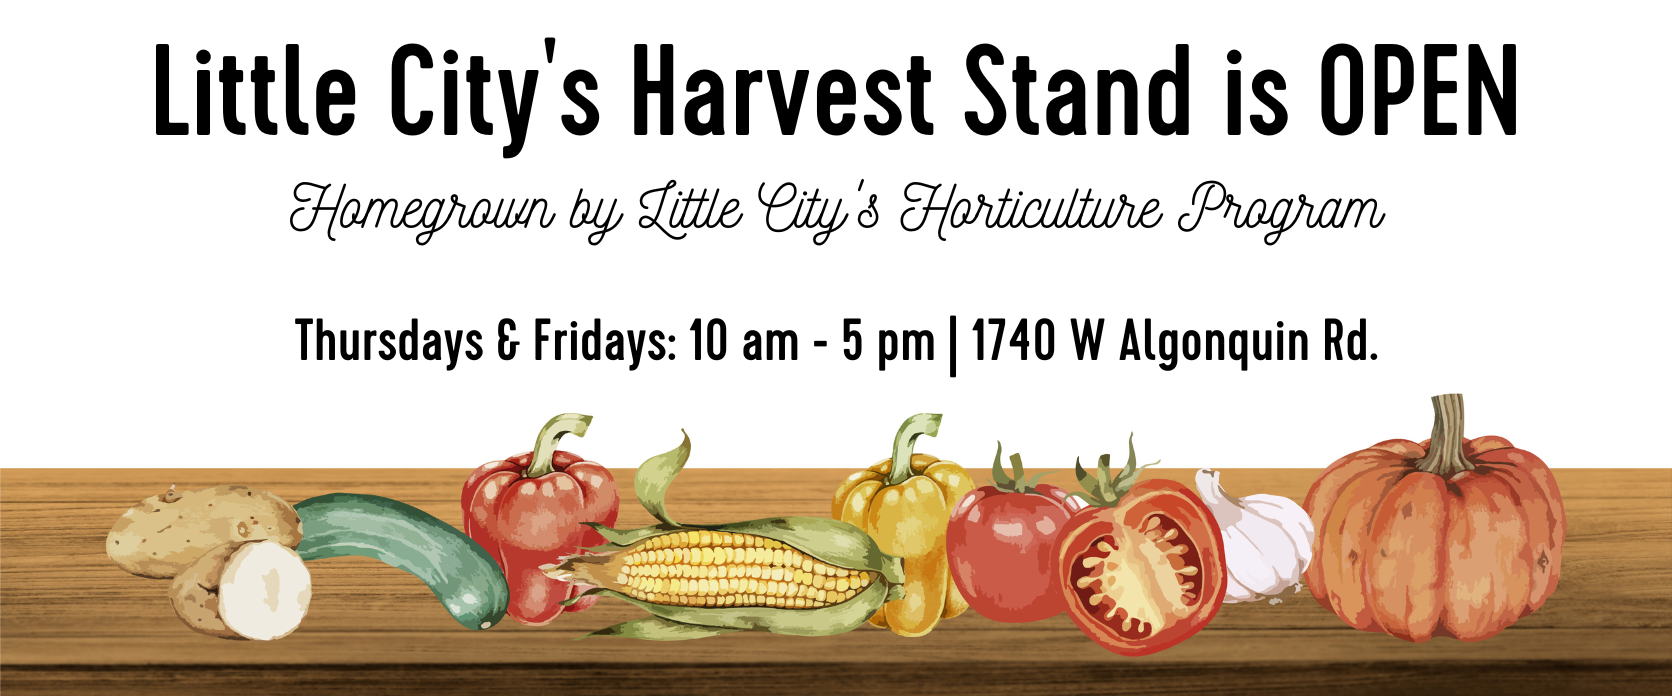 Little City's Harvest Stand is OPEN  Thursdays & Fridays from 10am to 5pm at 1740 W Algonquin Rd.